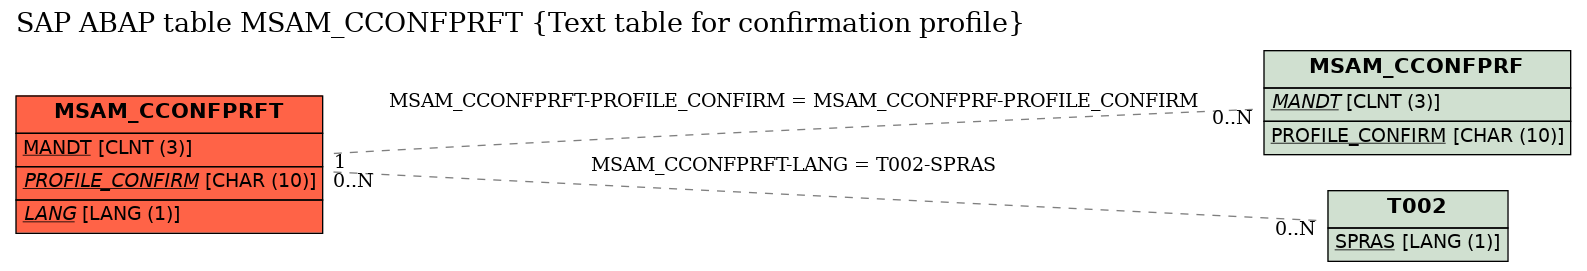 E-R Diagram for table MSAM_CCONFPRFT (Text table for confirmation profile)